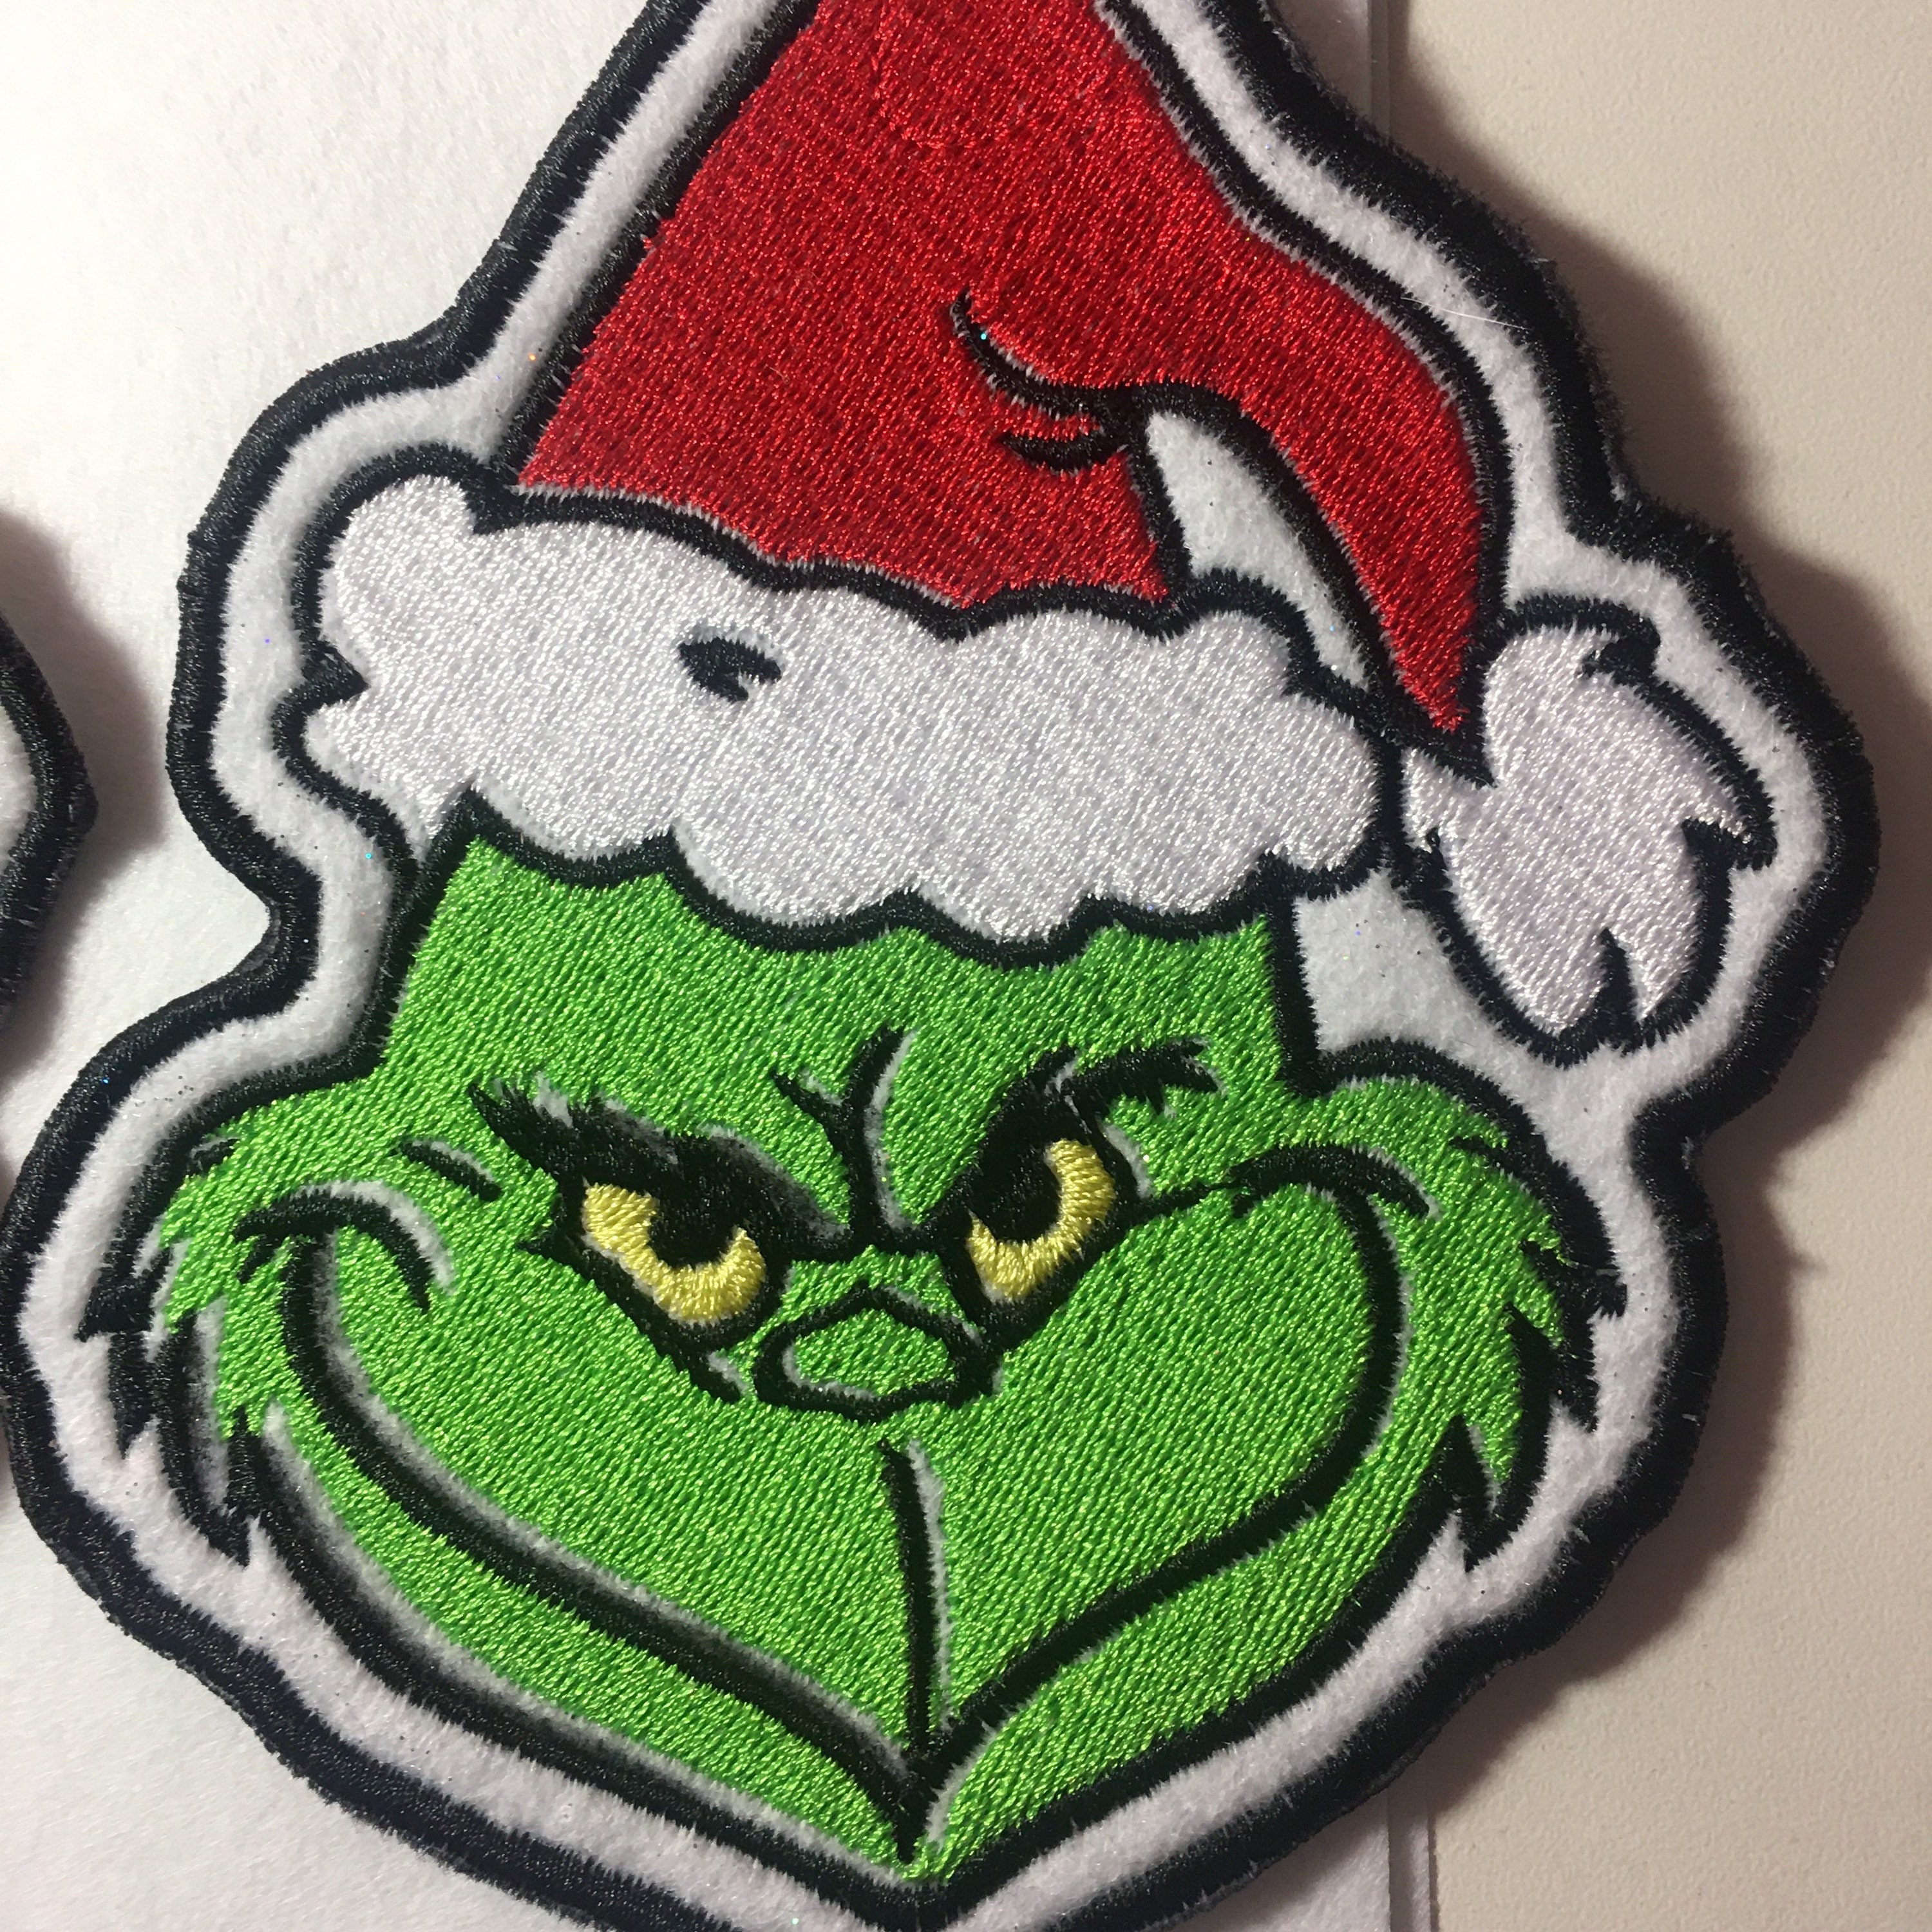 Big Grinch embroidered iron on/sew on patch/applique, 